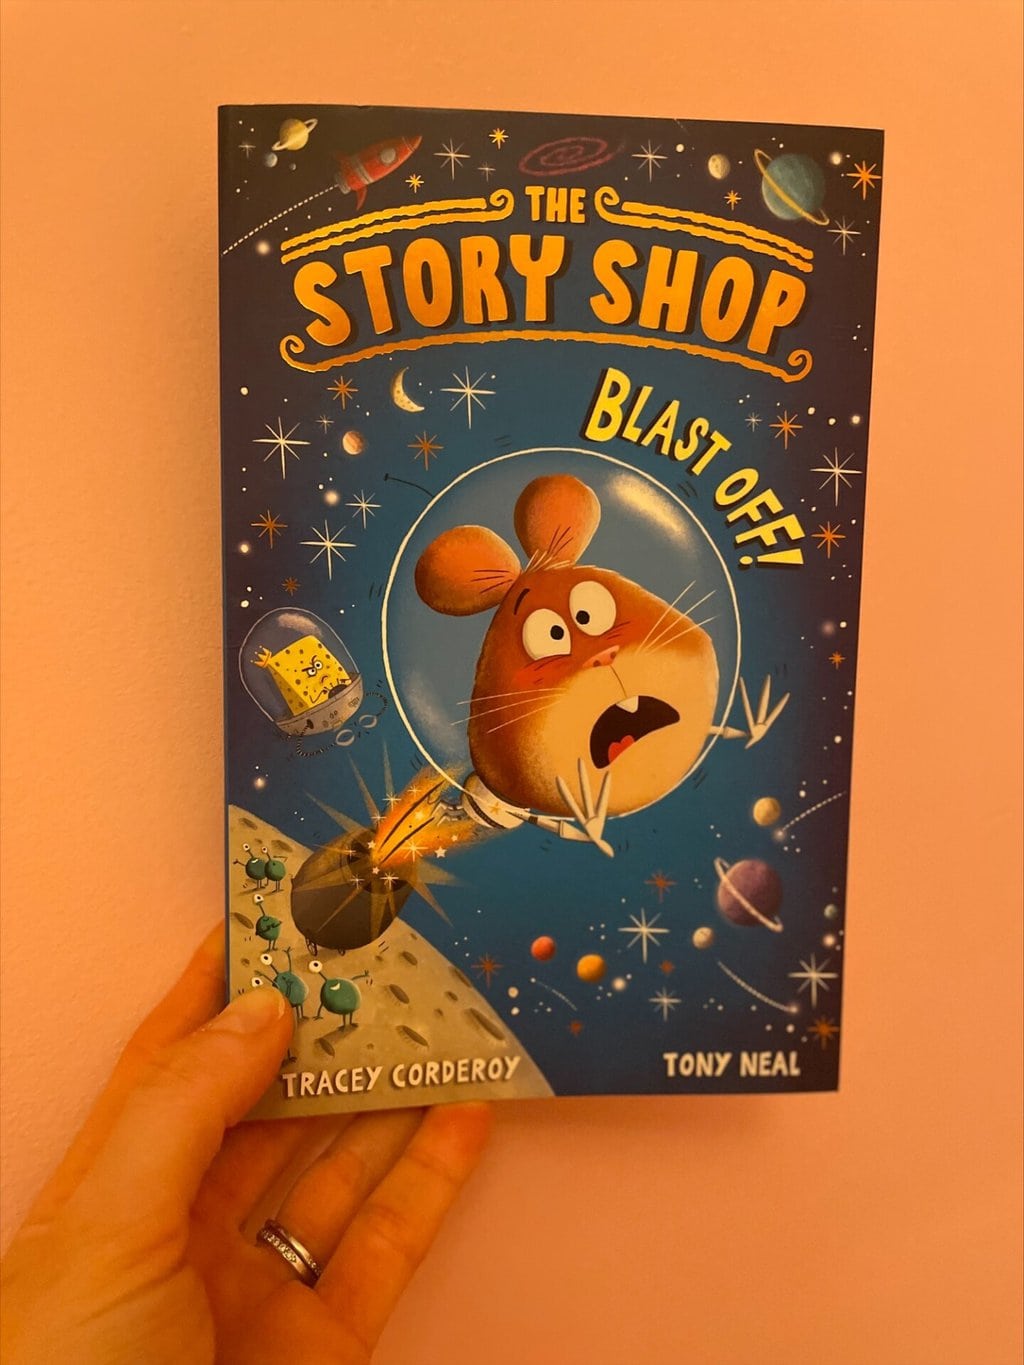 The Story Shop Blast Off – Tracey Corderoy